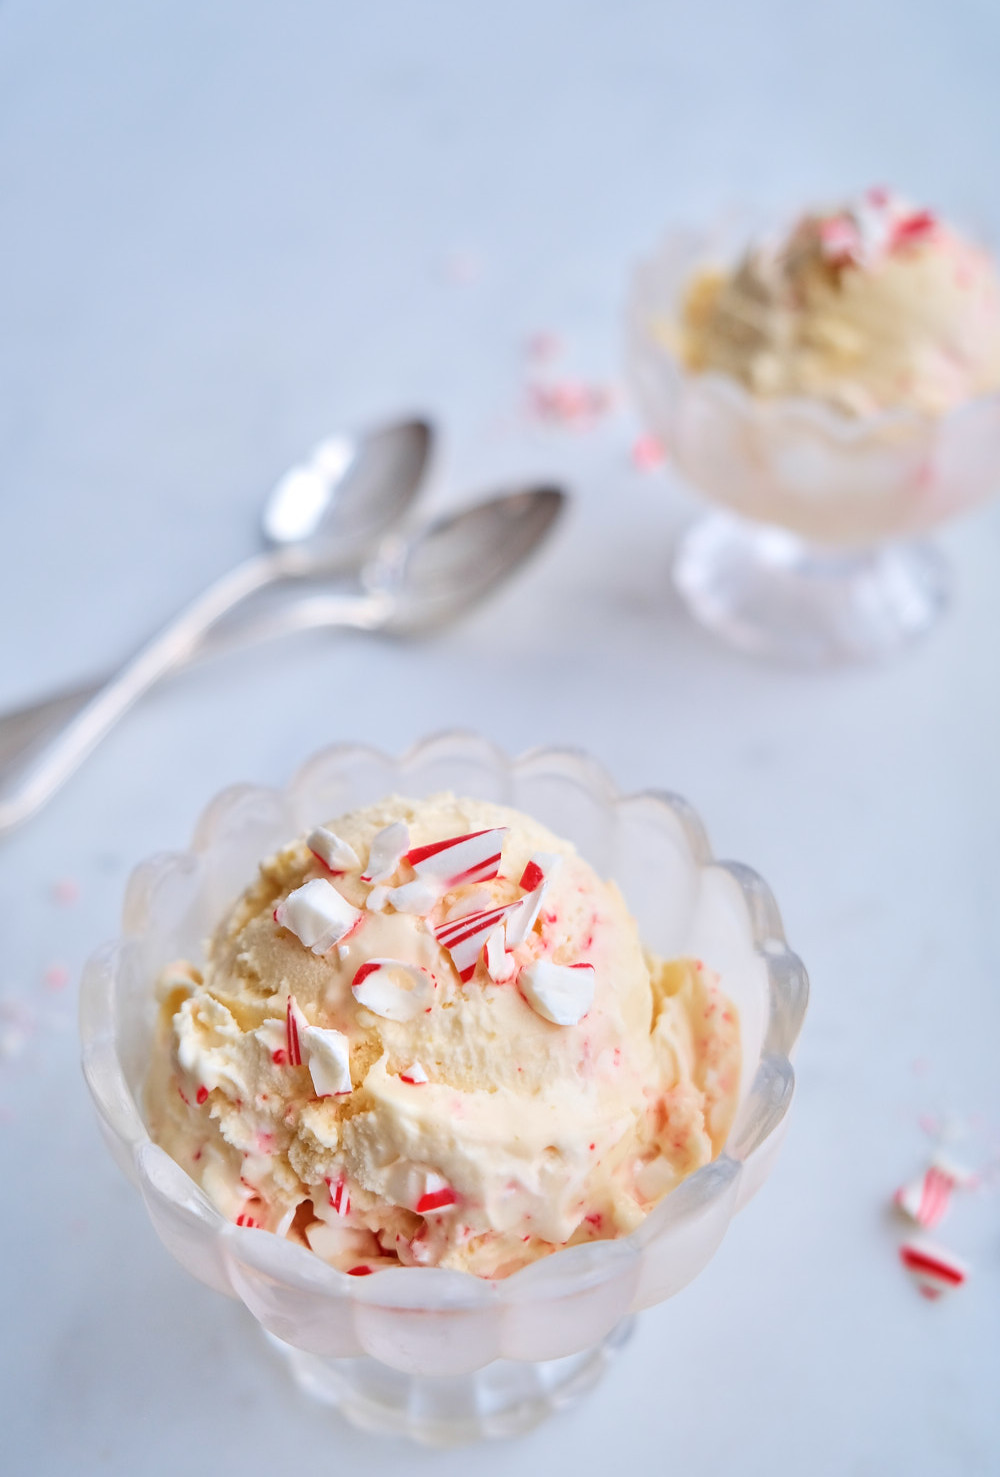 A bowl of peppermint stick ice cream with crushed candy canes on top.